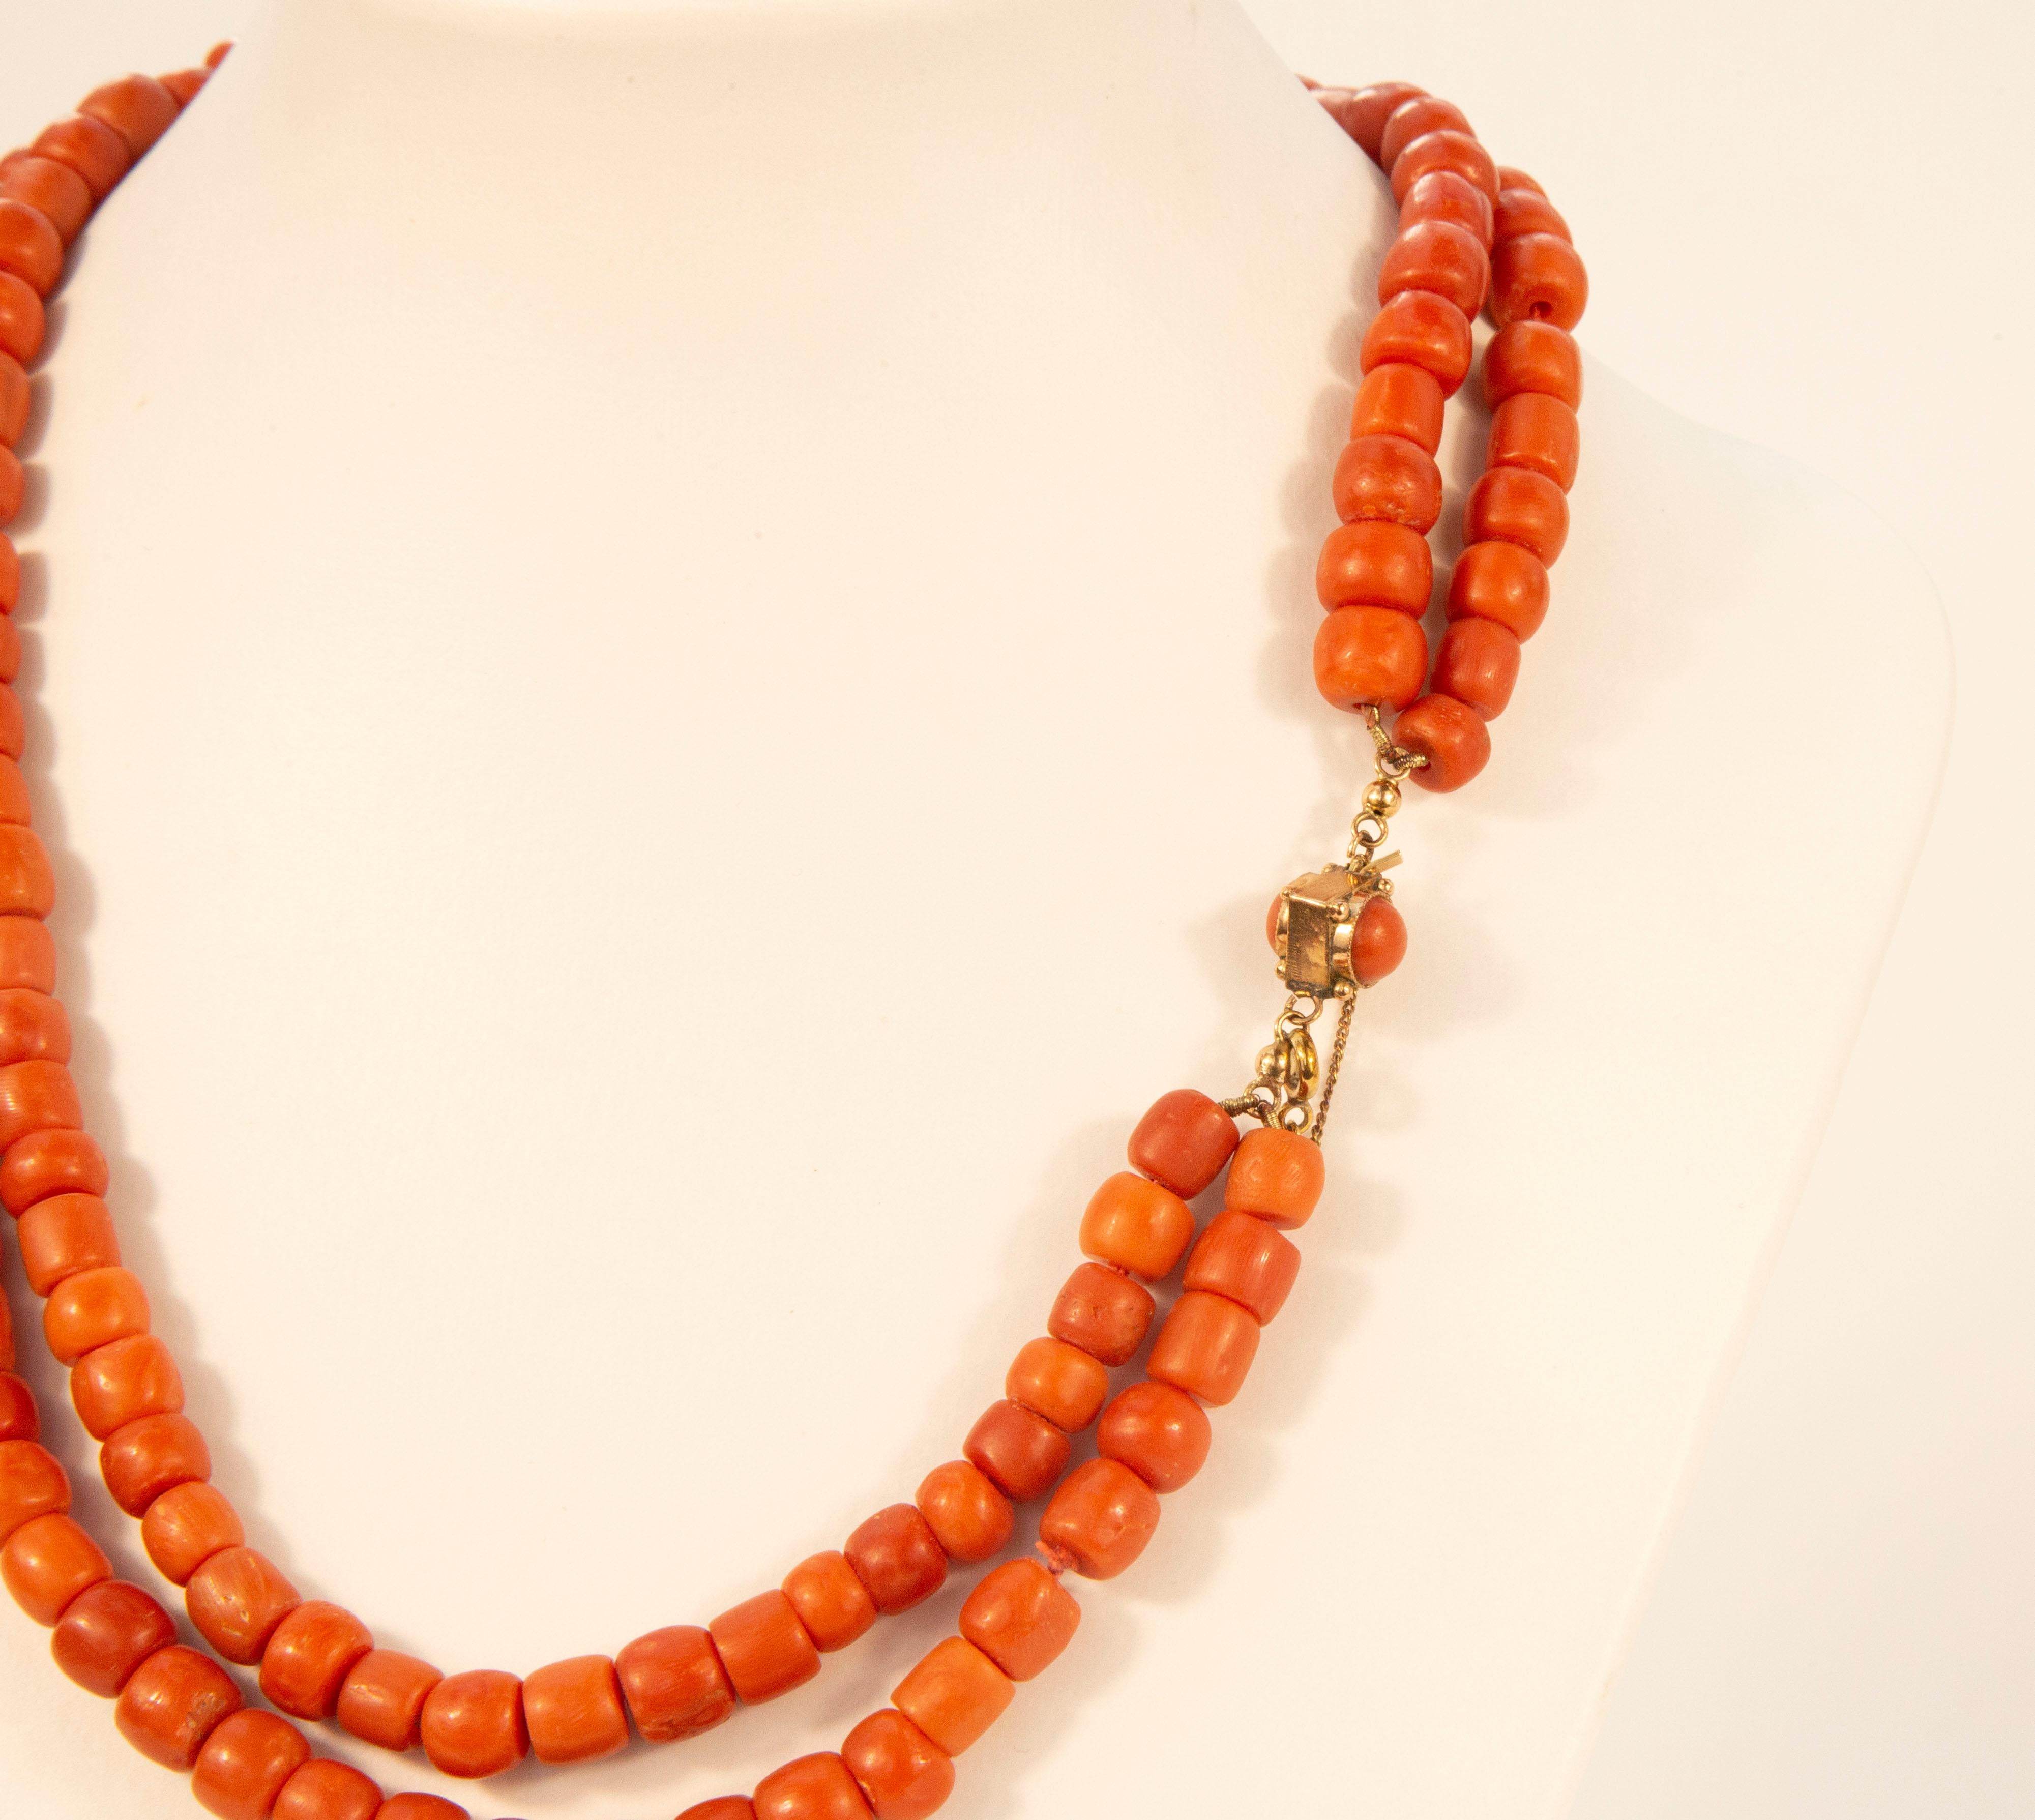 Edwardian Antique Two Strand Red Coral Necklace with a 14 Karat Rose Gold Barrel Lock For Sale